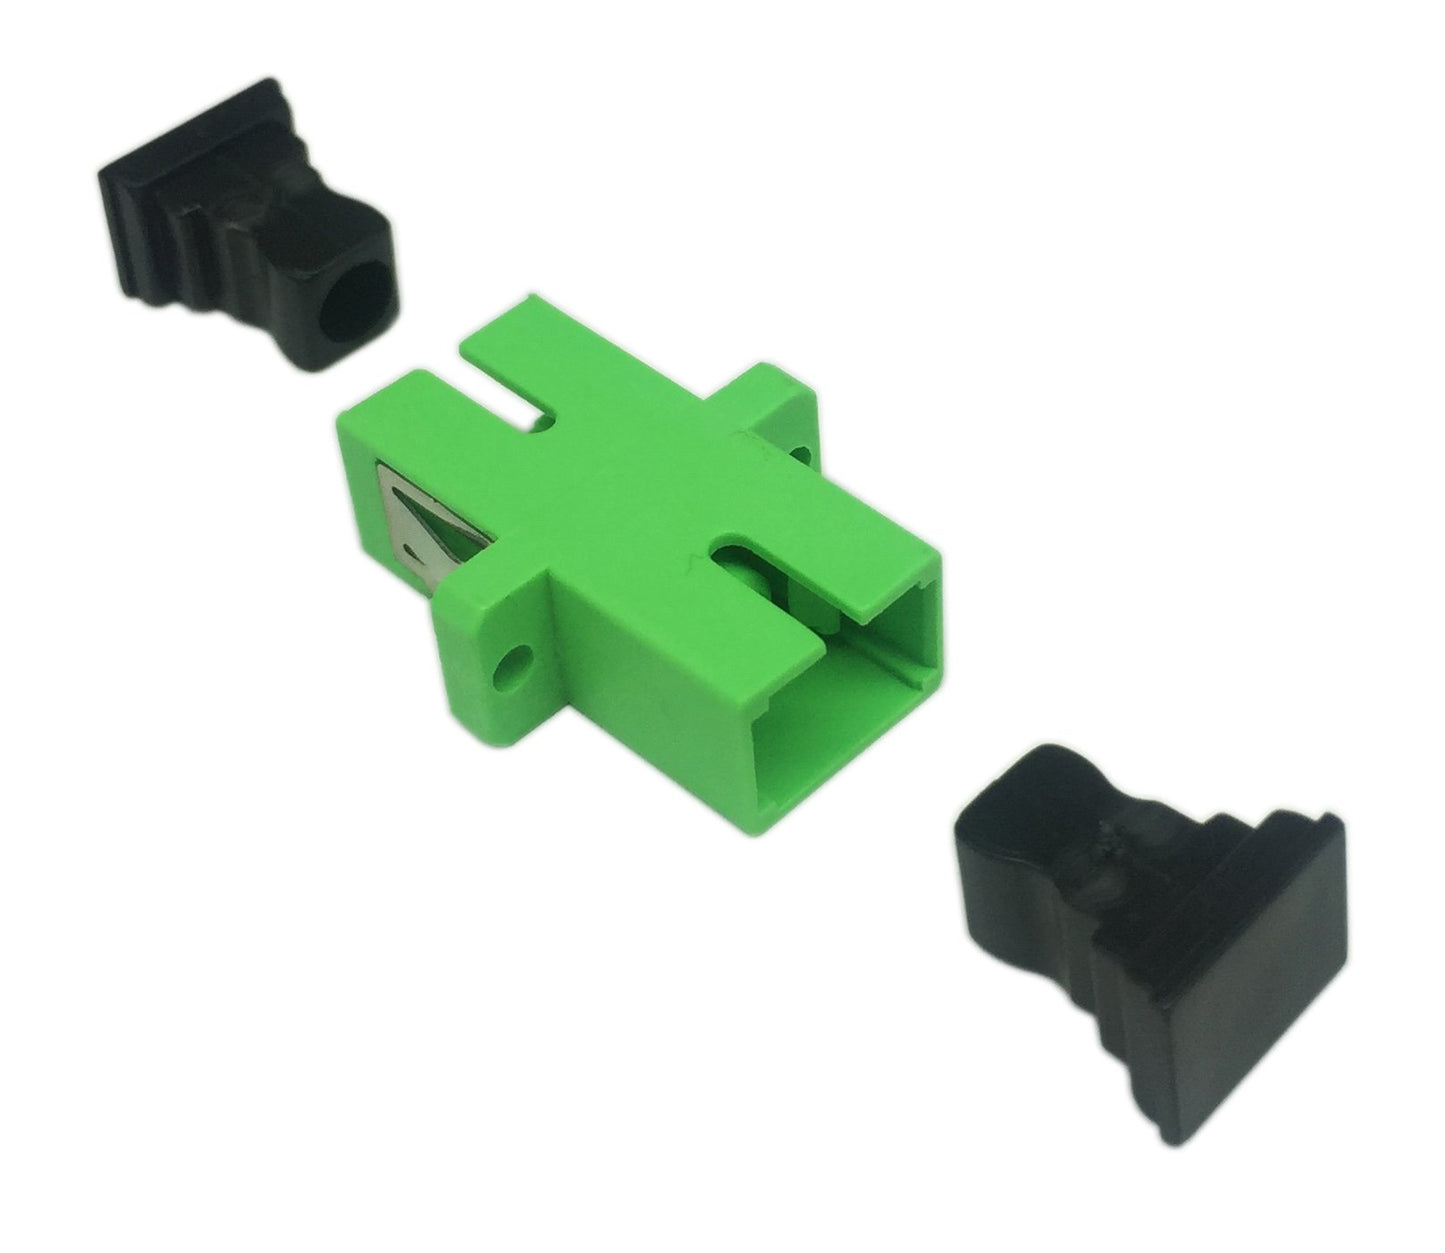 SC Singlemode Fiber Optic Adapter SC Female to SC Female APC Simplex Coupler Network Internet Connector Adapter with Mount Panel (Green 5-Pack)